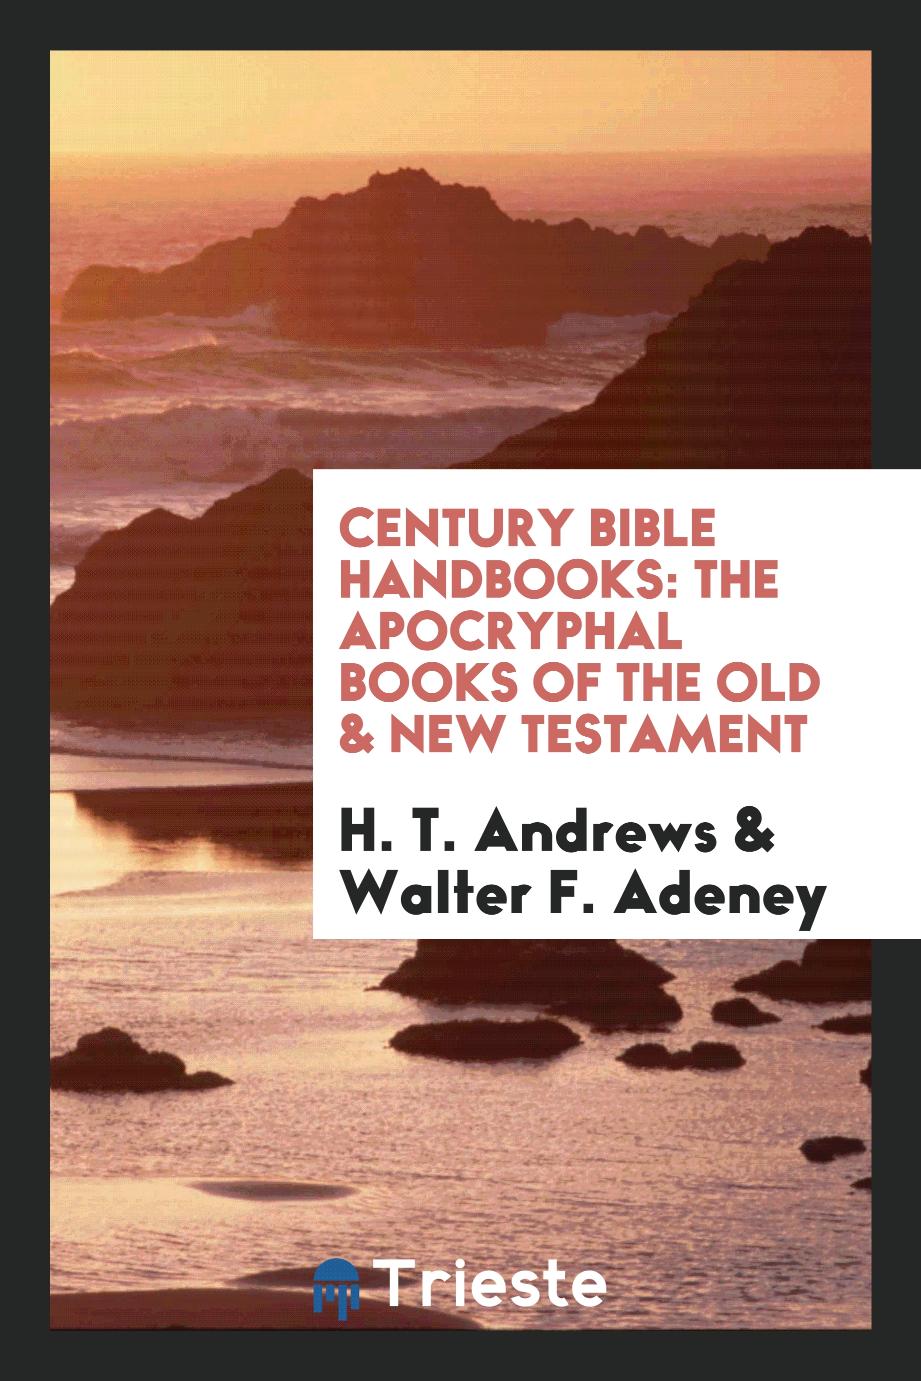 Century Bible Handbooks: The Apocryphal Books of the Old & New Testament